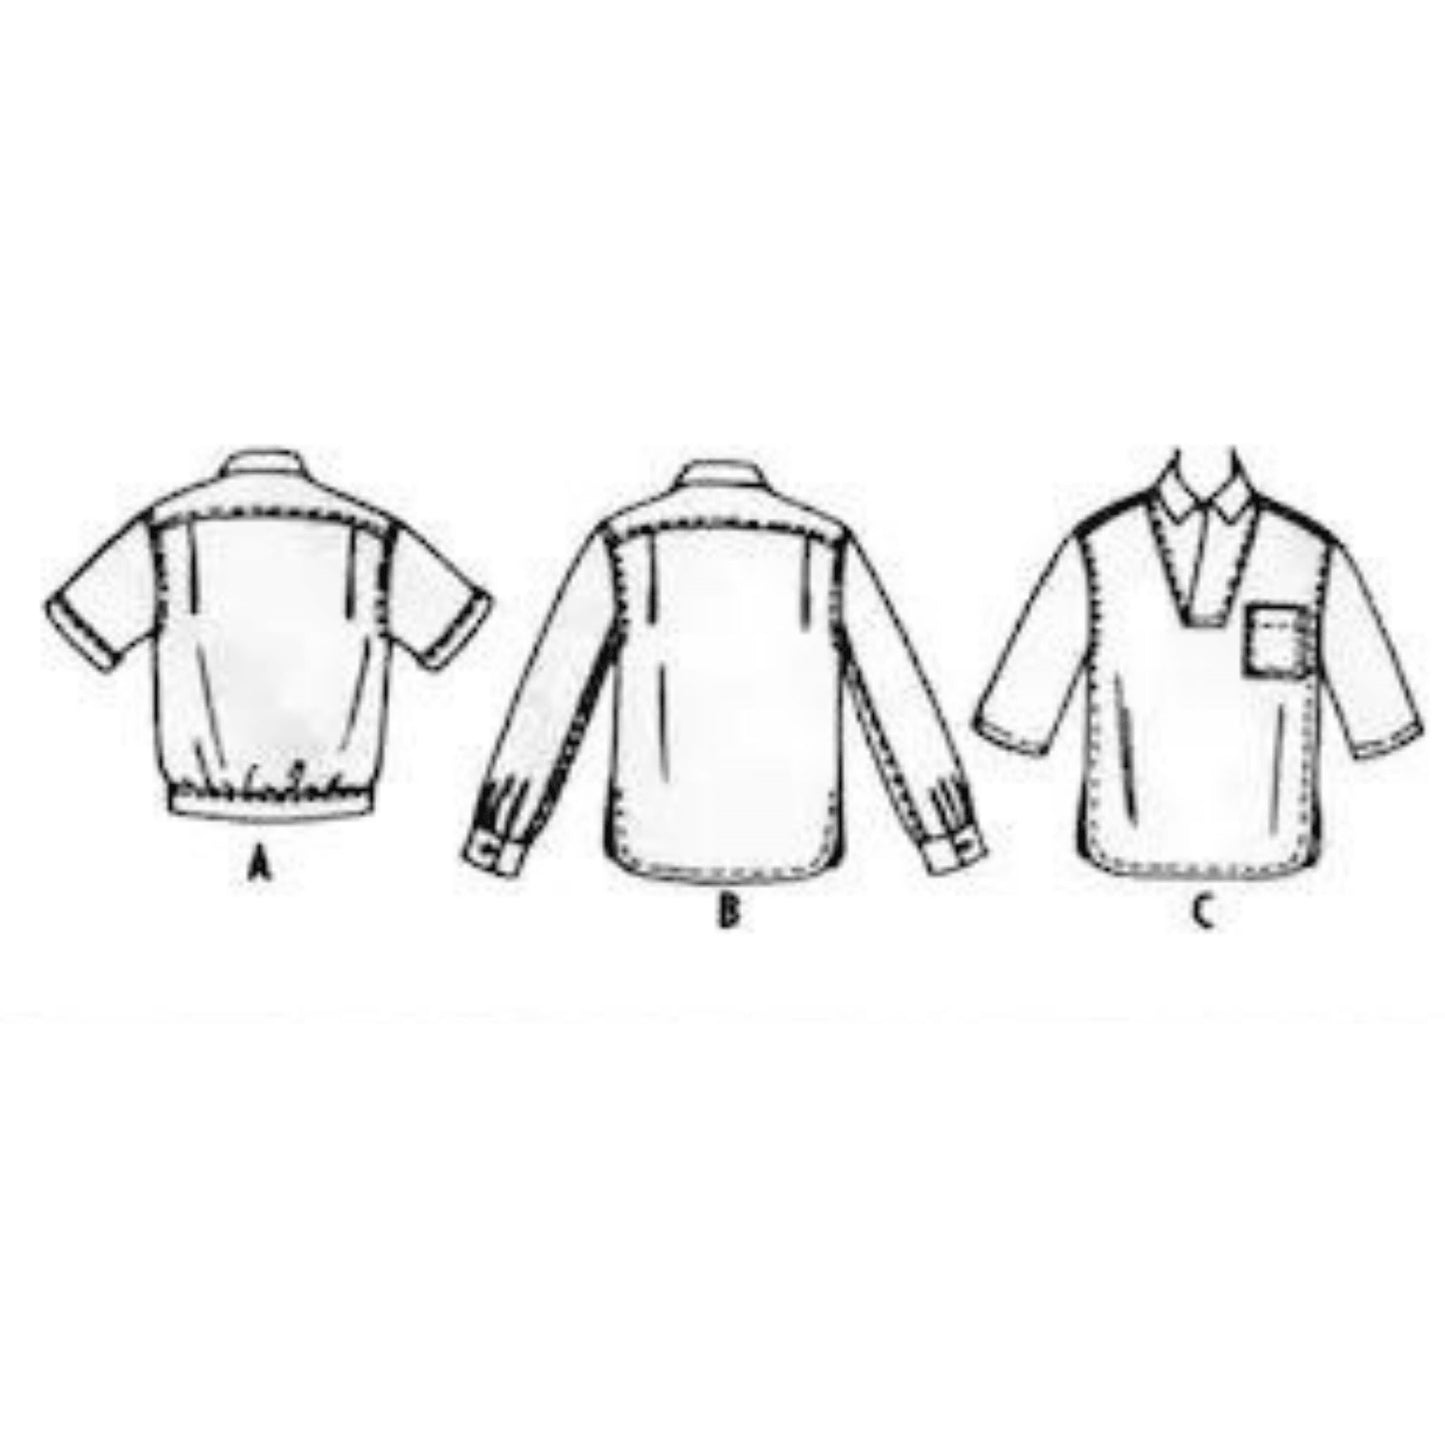 Line drawing of a shirt